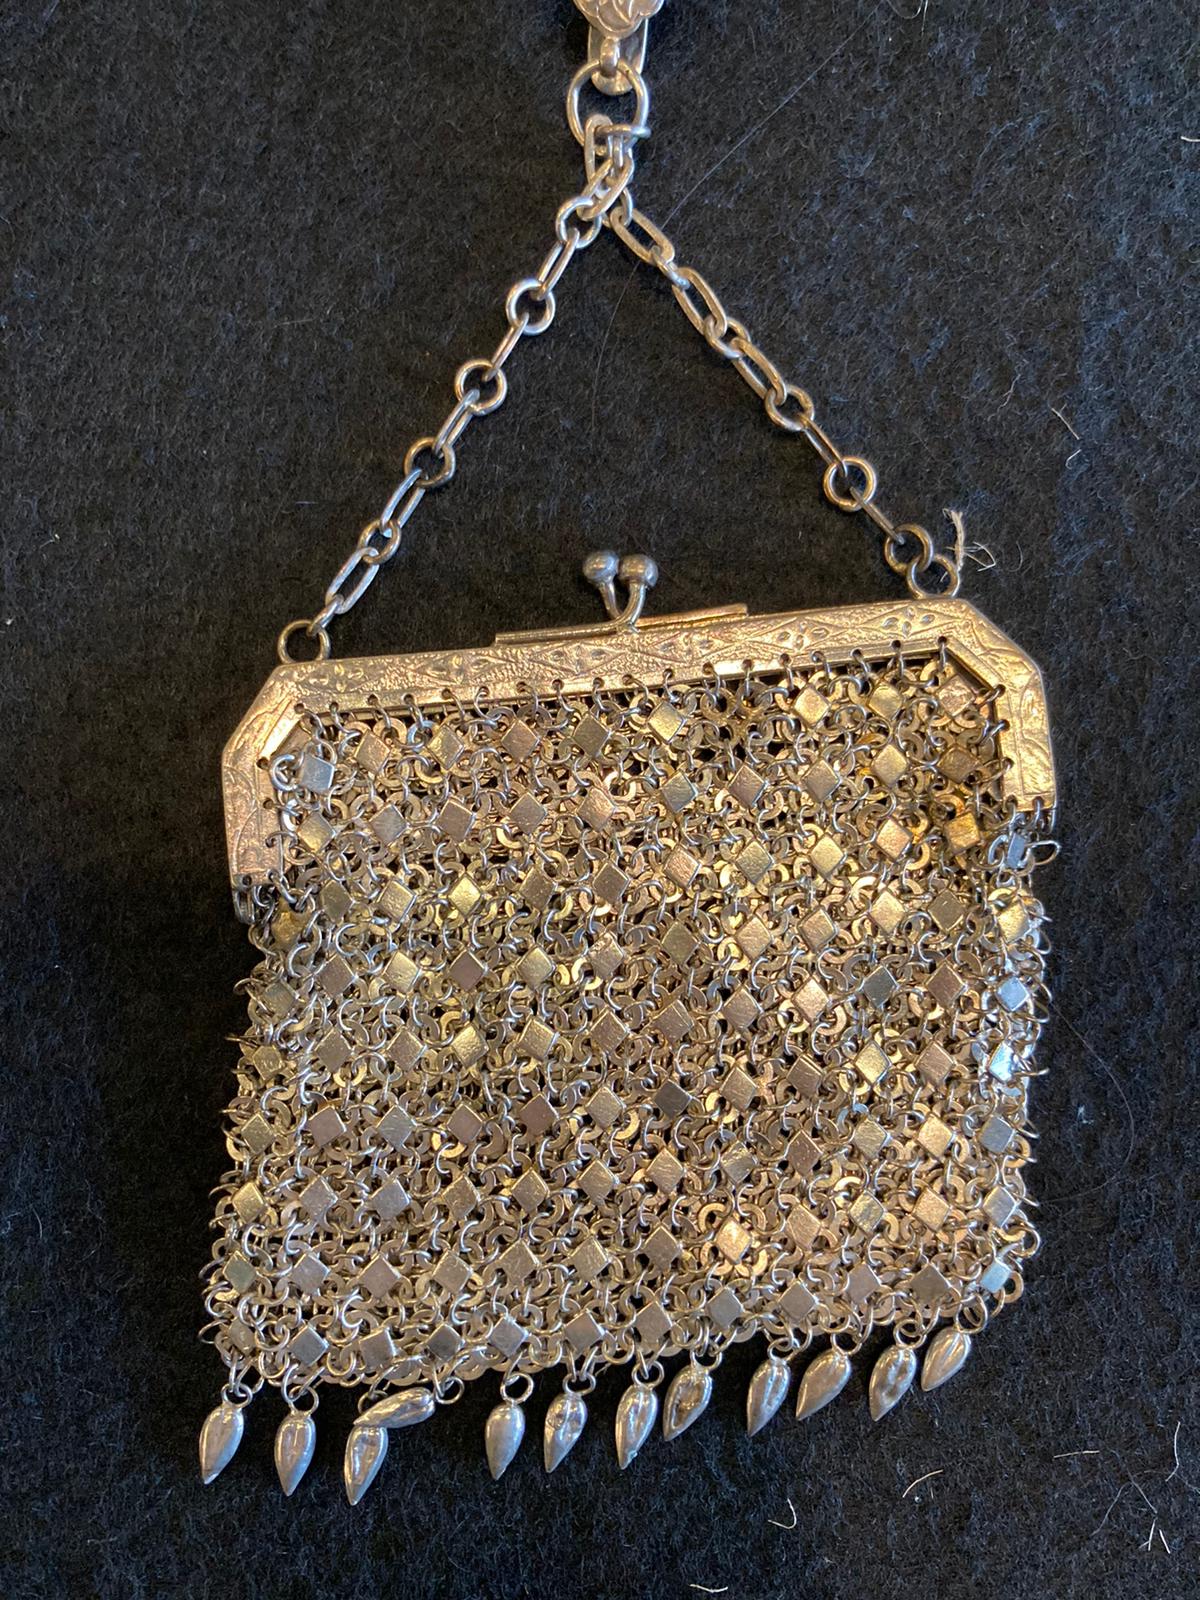 TWO WHITE METAL MESH PURSES WITH CHATELAINE CLIPS - Image 9 of 15